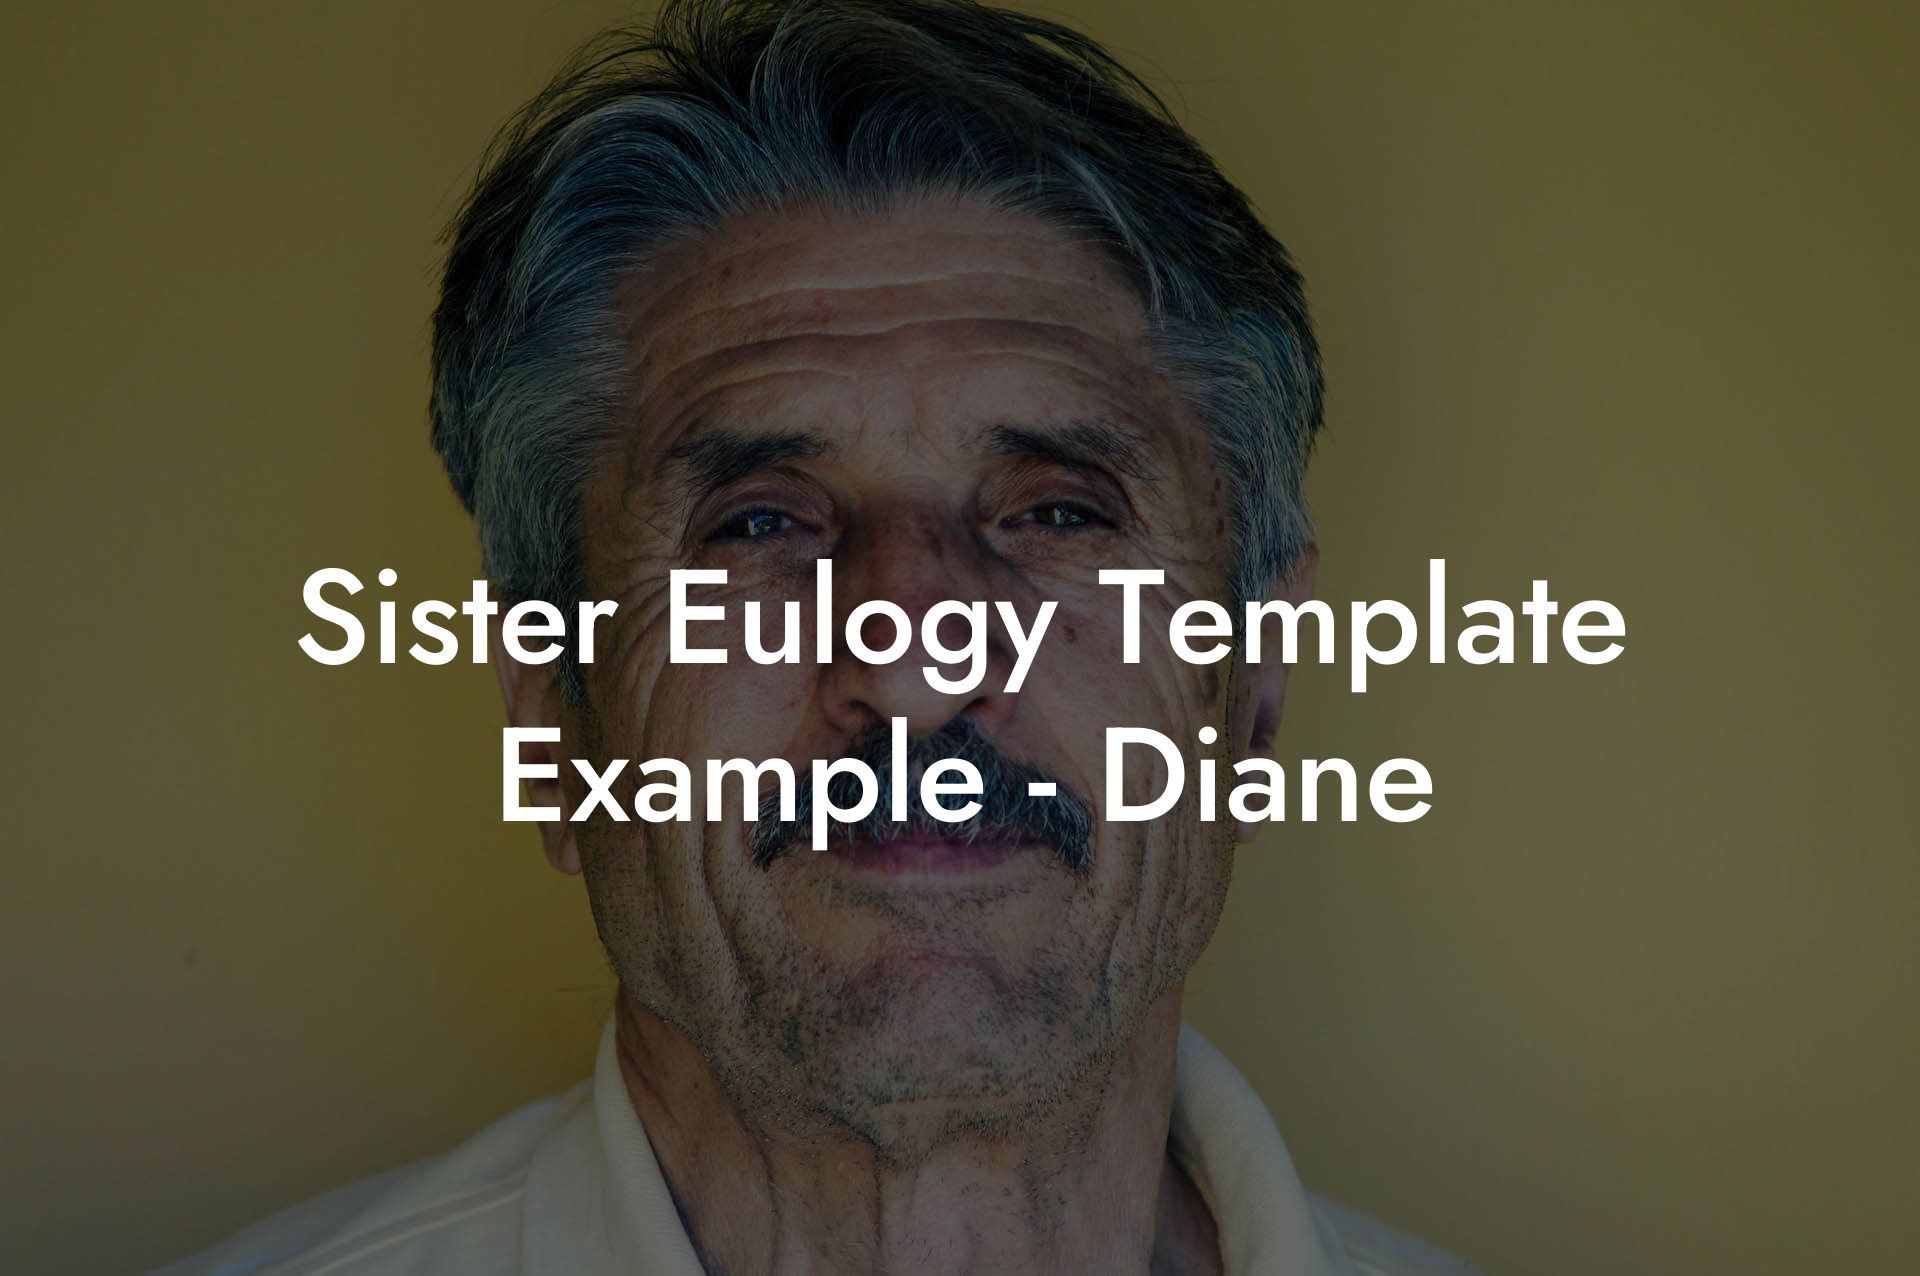 Sister Eulogy Template Example - Diane